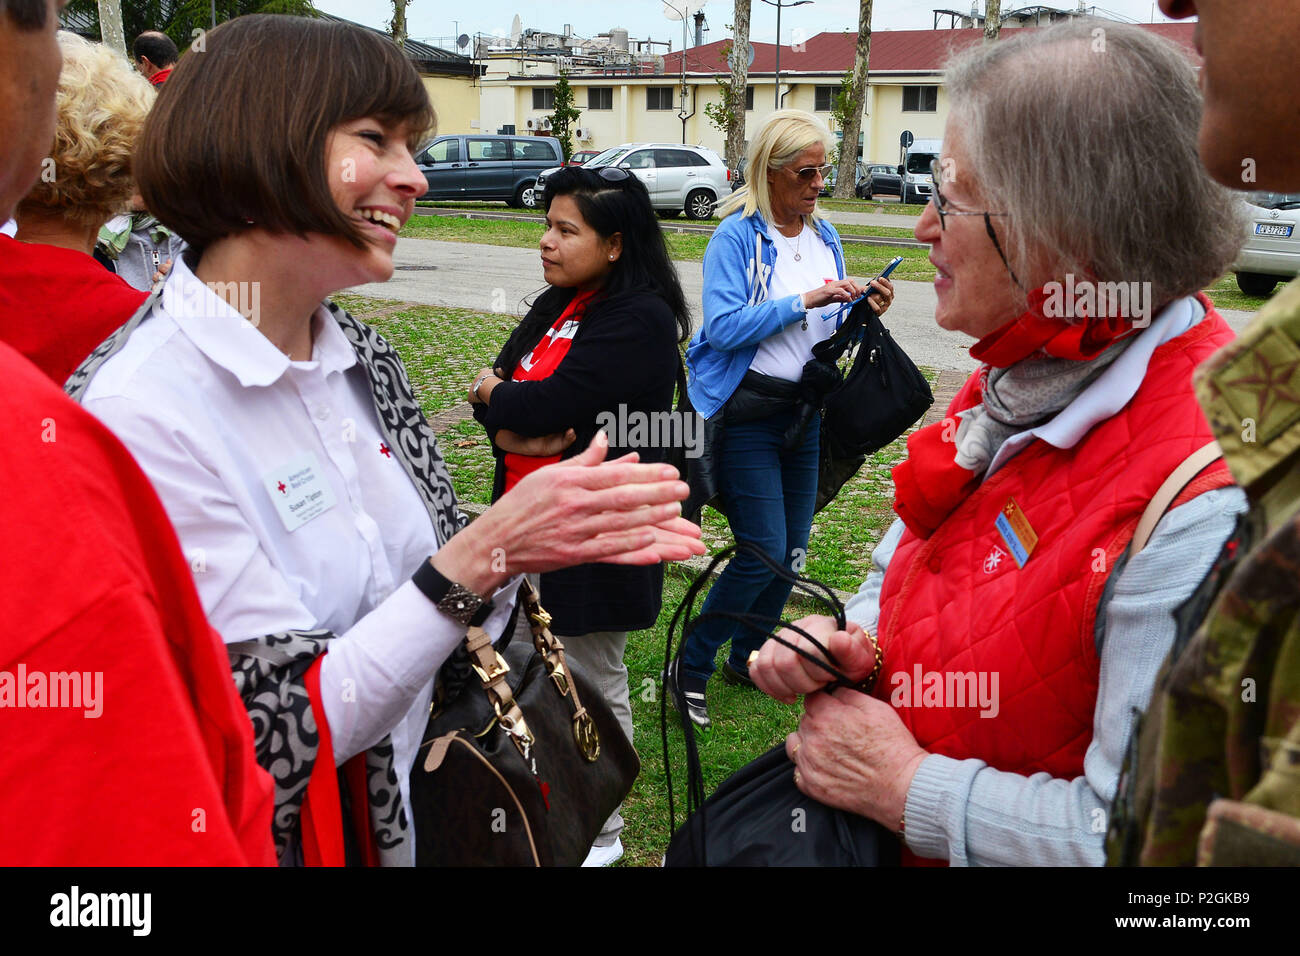 Ms. Susan Tipton, Regional Program Director Italy/Spain Region, of the American Red Cross (left), greets Ms. Maria Giulia Medolago Albani, Sovereign Military Order of Malta (right), during the visit at caserma Ederle, 22 Sept. 2016, Vicenza, Italy. The Sovereign Military Order of Malta (SMOM) or Order of Malta, is a Roman Catholic religious order traditionally of military, chivalrous and noble nature for defense of Catholic faith and assistance to the poor. (U.S. Army photo by Visual Information Specialist Paolo Bovo/Released) Stock Photo